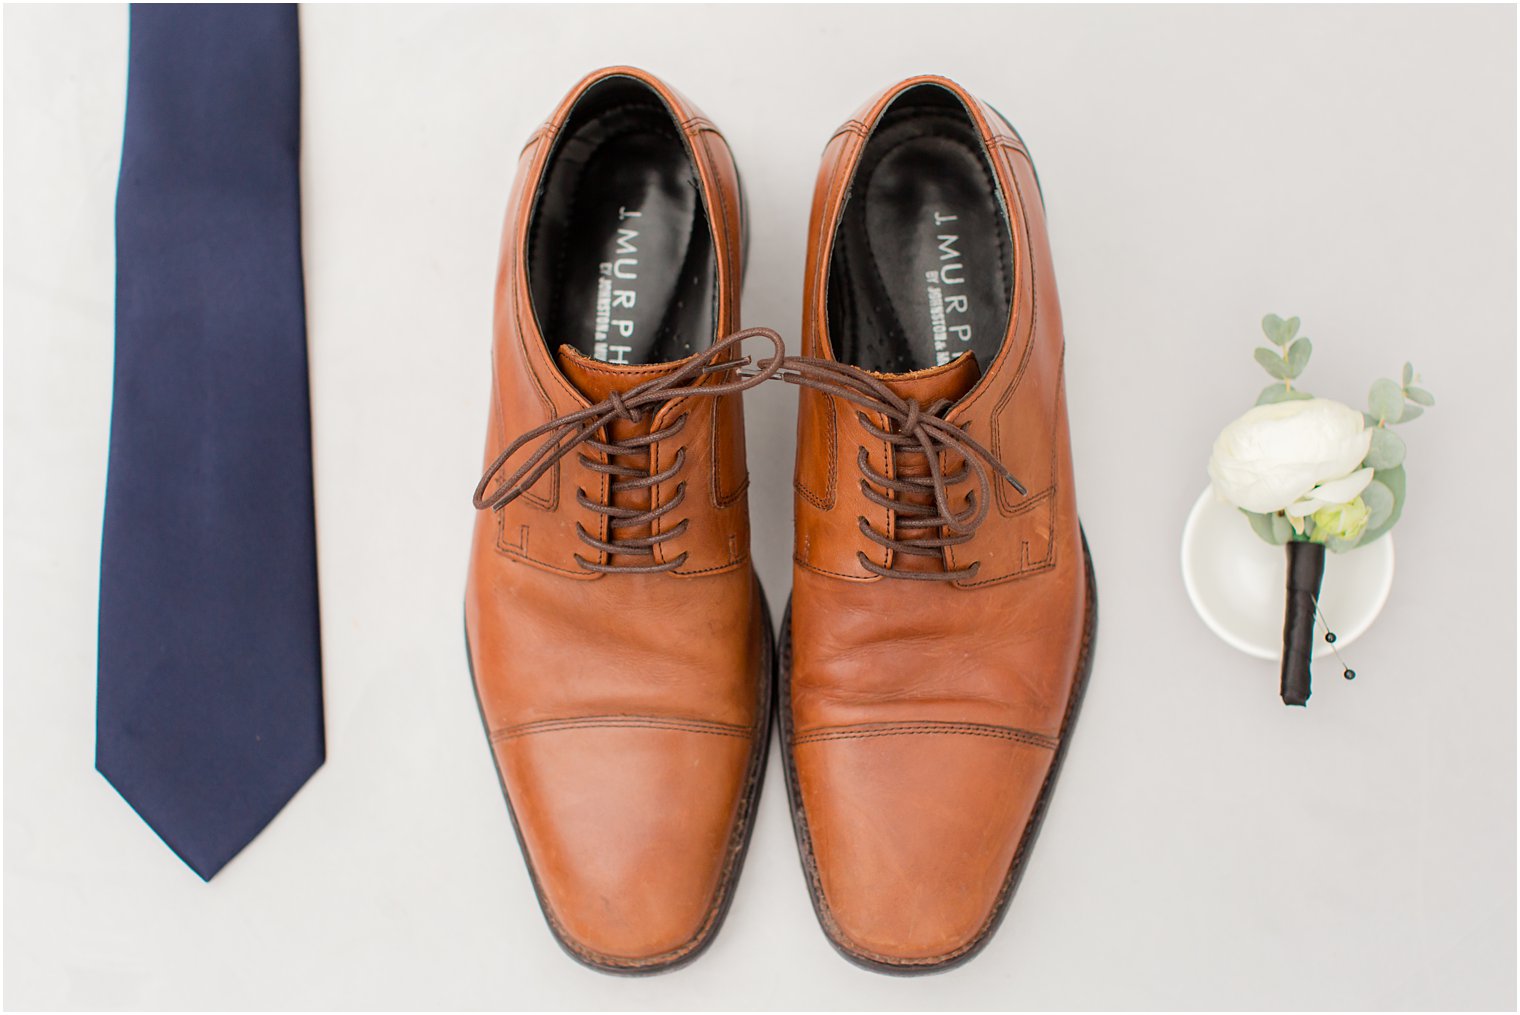 groom's brown shoes with navy tie for NJ wedding 